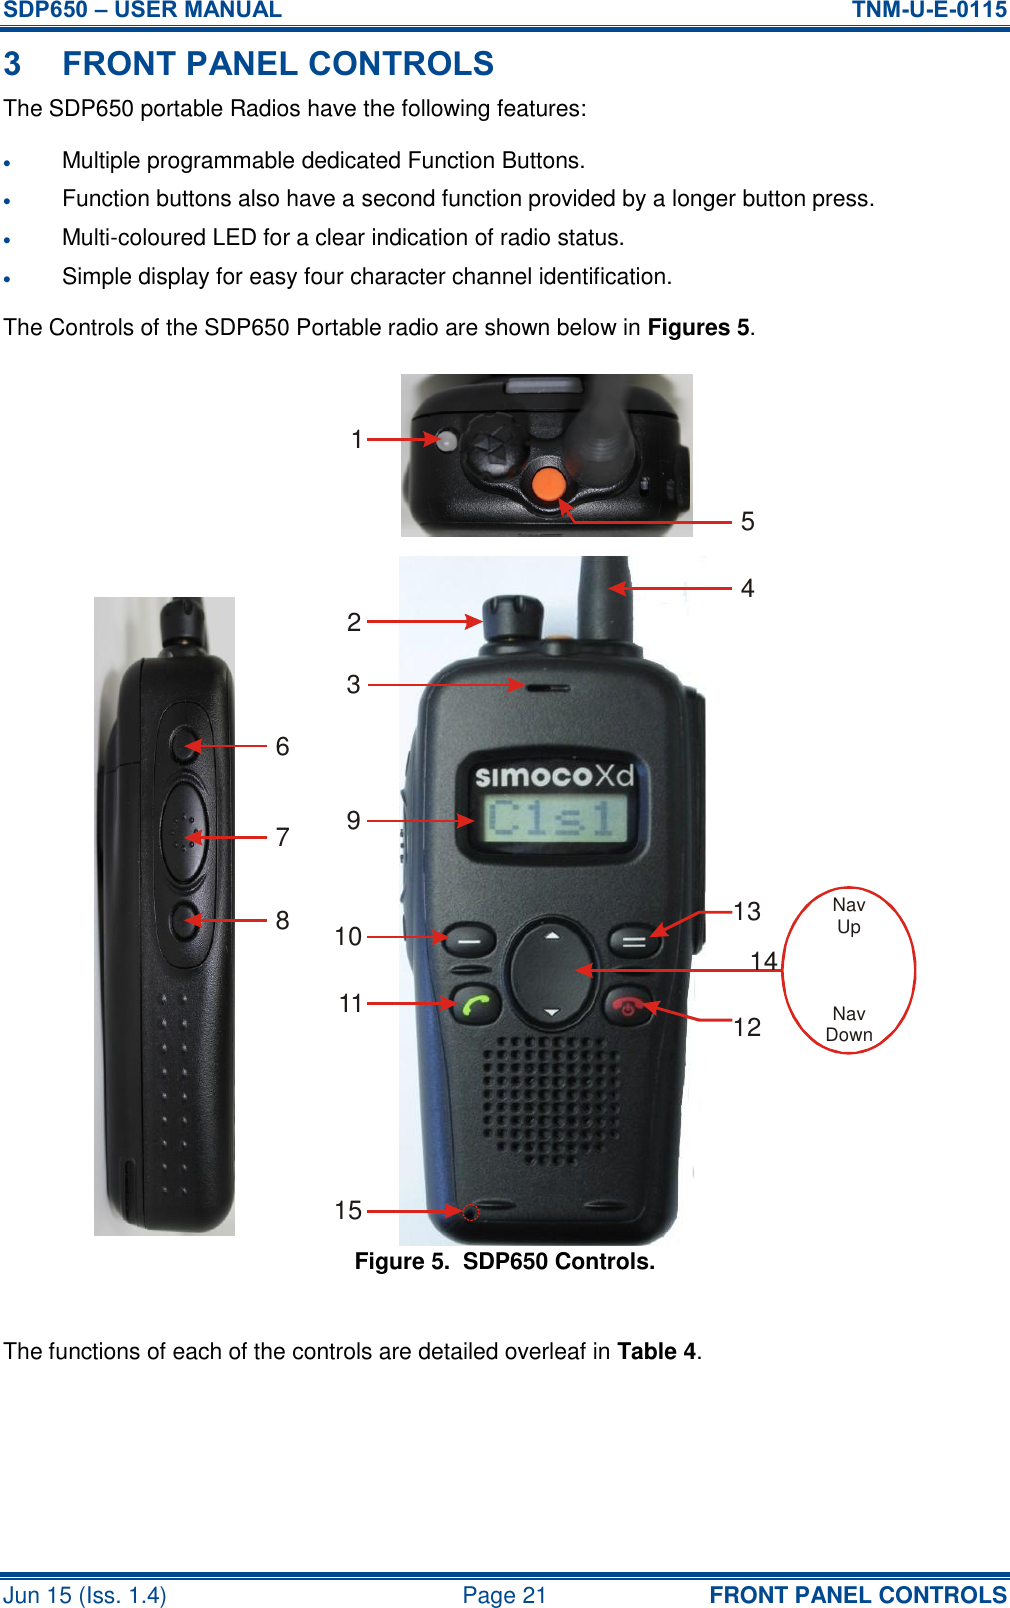 SDP650 – USER MANUAL  TNM-U-E-0115 Jun 15 (Iss. 1.4)  Page 21 FRONT PANEL CONTROLS 3 FRONT PANEL CONTROLS The SDP650 portable Radios have the following features:  Multiple programmable dedicated Function Buttons.  Function buttons also have a second function provided by a longer button press.  Multi-coloured LED for a clear indication of radio status.  Simple display for easy four character channel identification. The Controls of the SDP650 Portable radio are shown below in Figures 5. Figure 5.  SDP650 Controls.  The functions of each of the controls are detailed overleaf in Table 4.   NavUpNavDown1234567891011 12131415